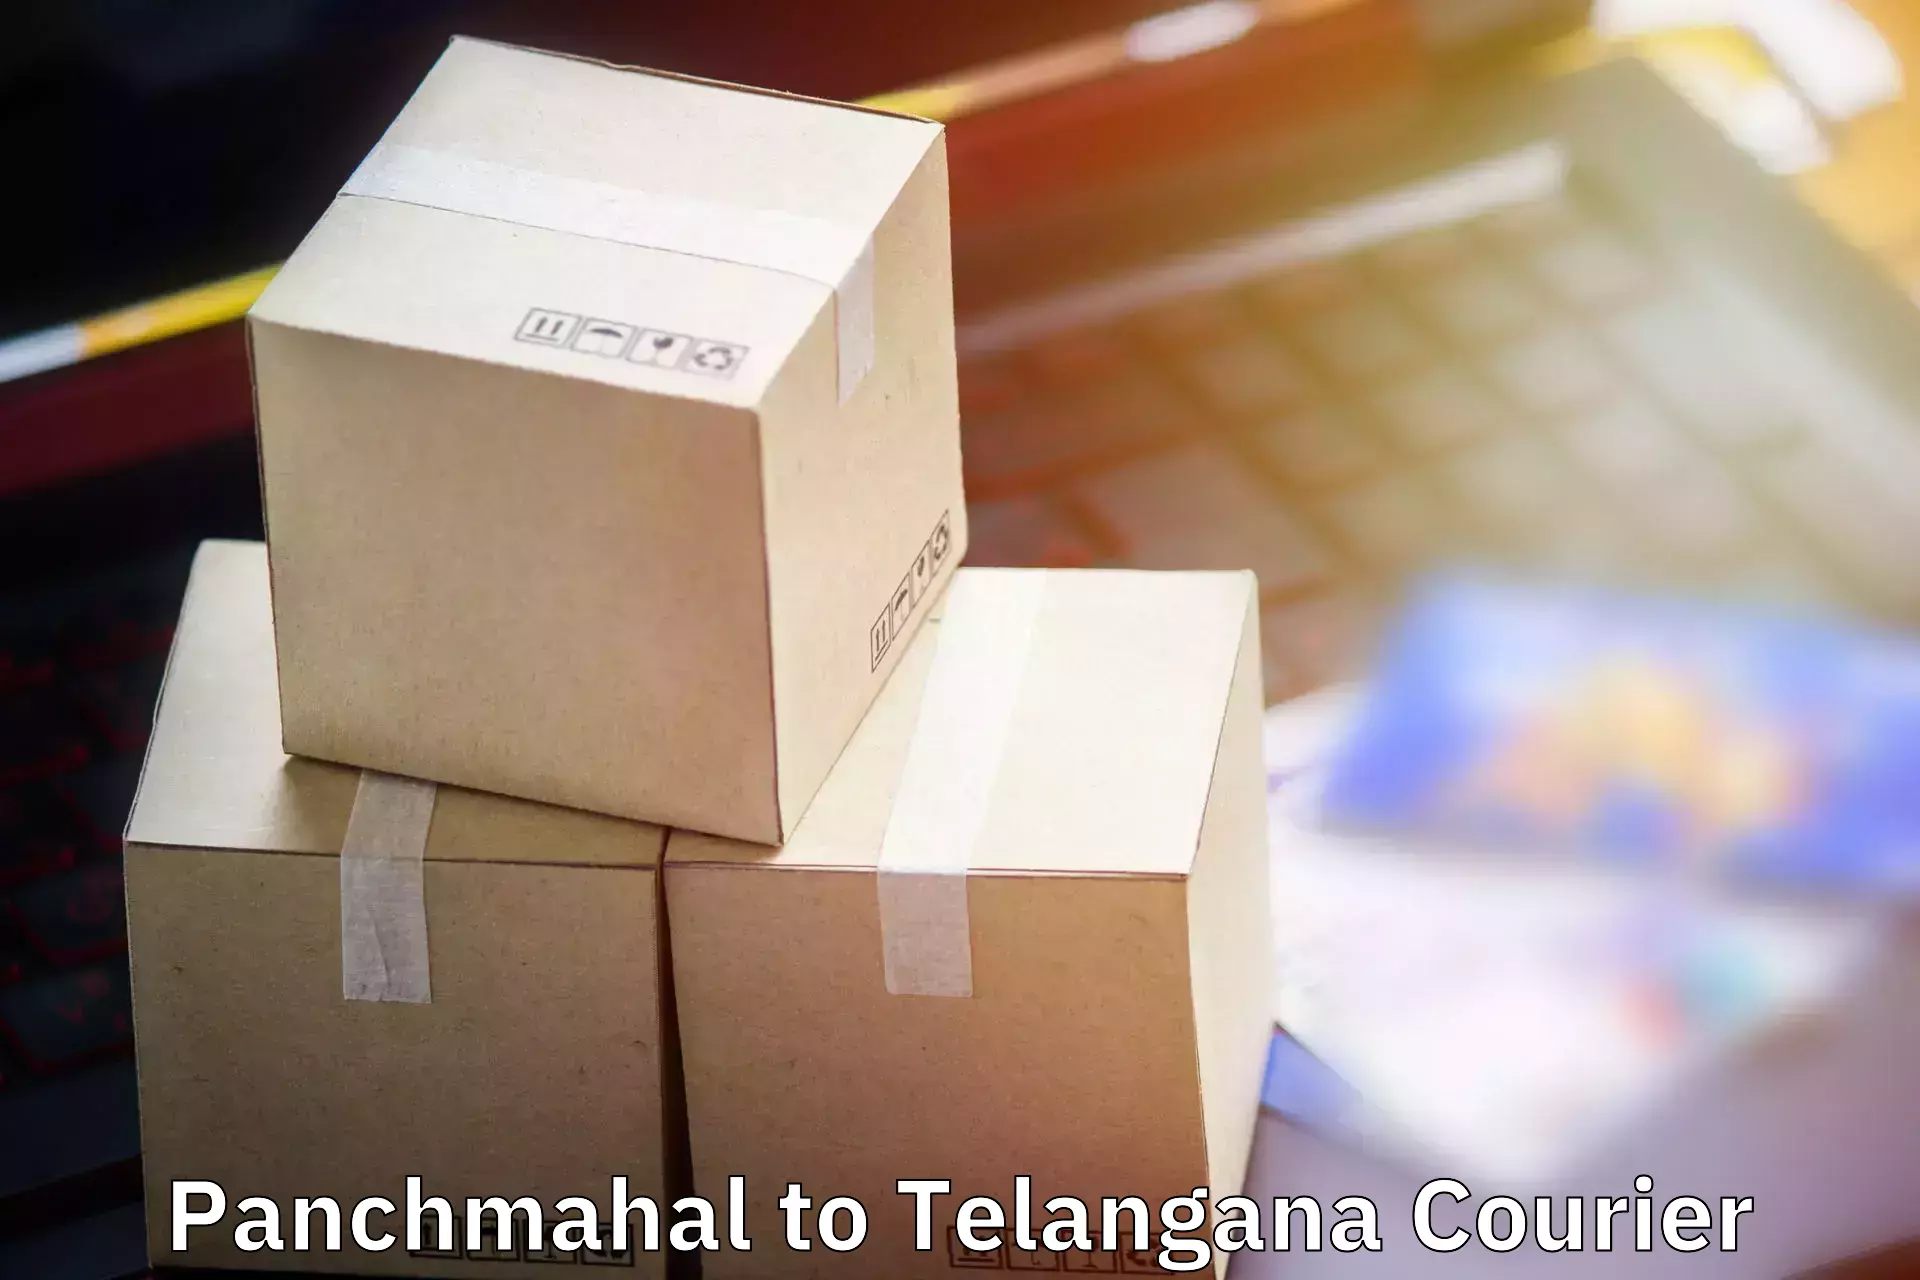 Personal effects shipping Panchmahal to Jainad